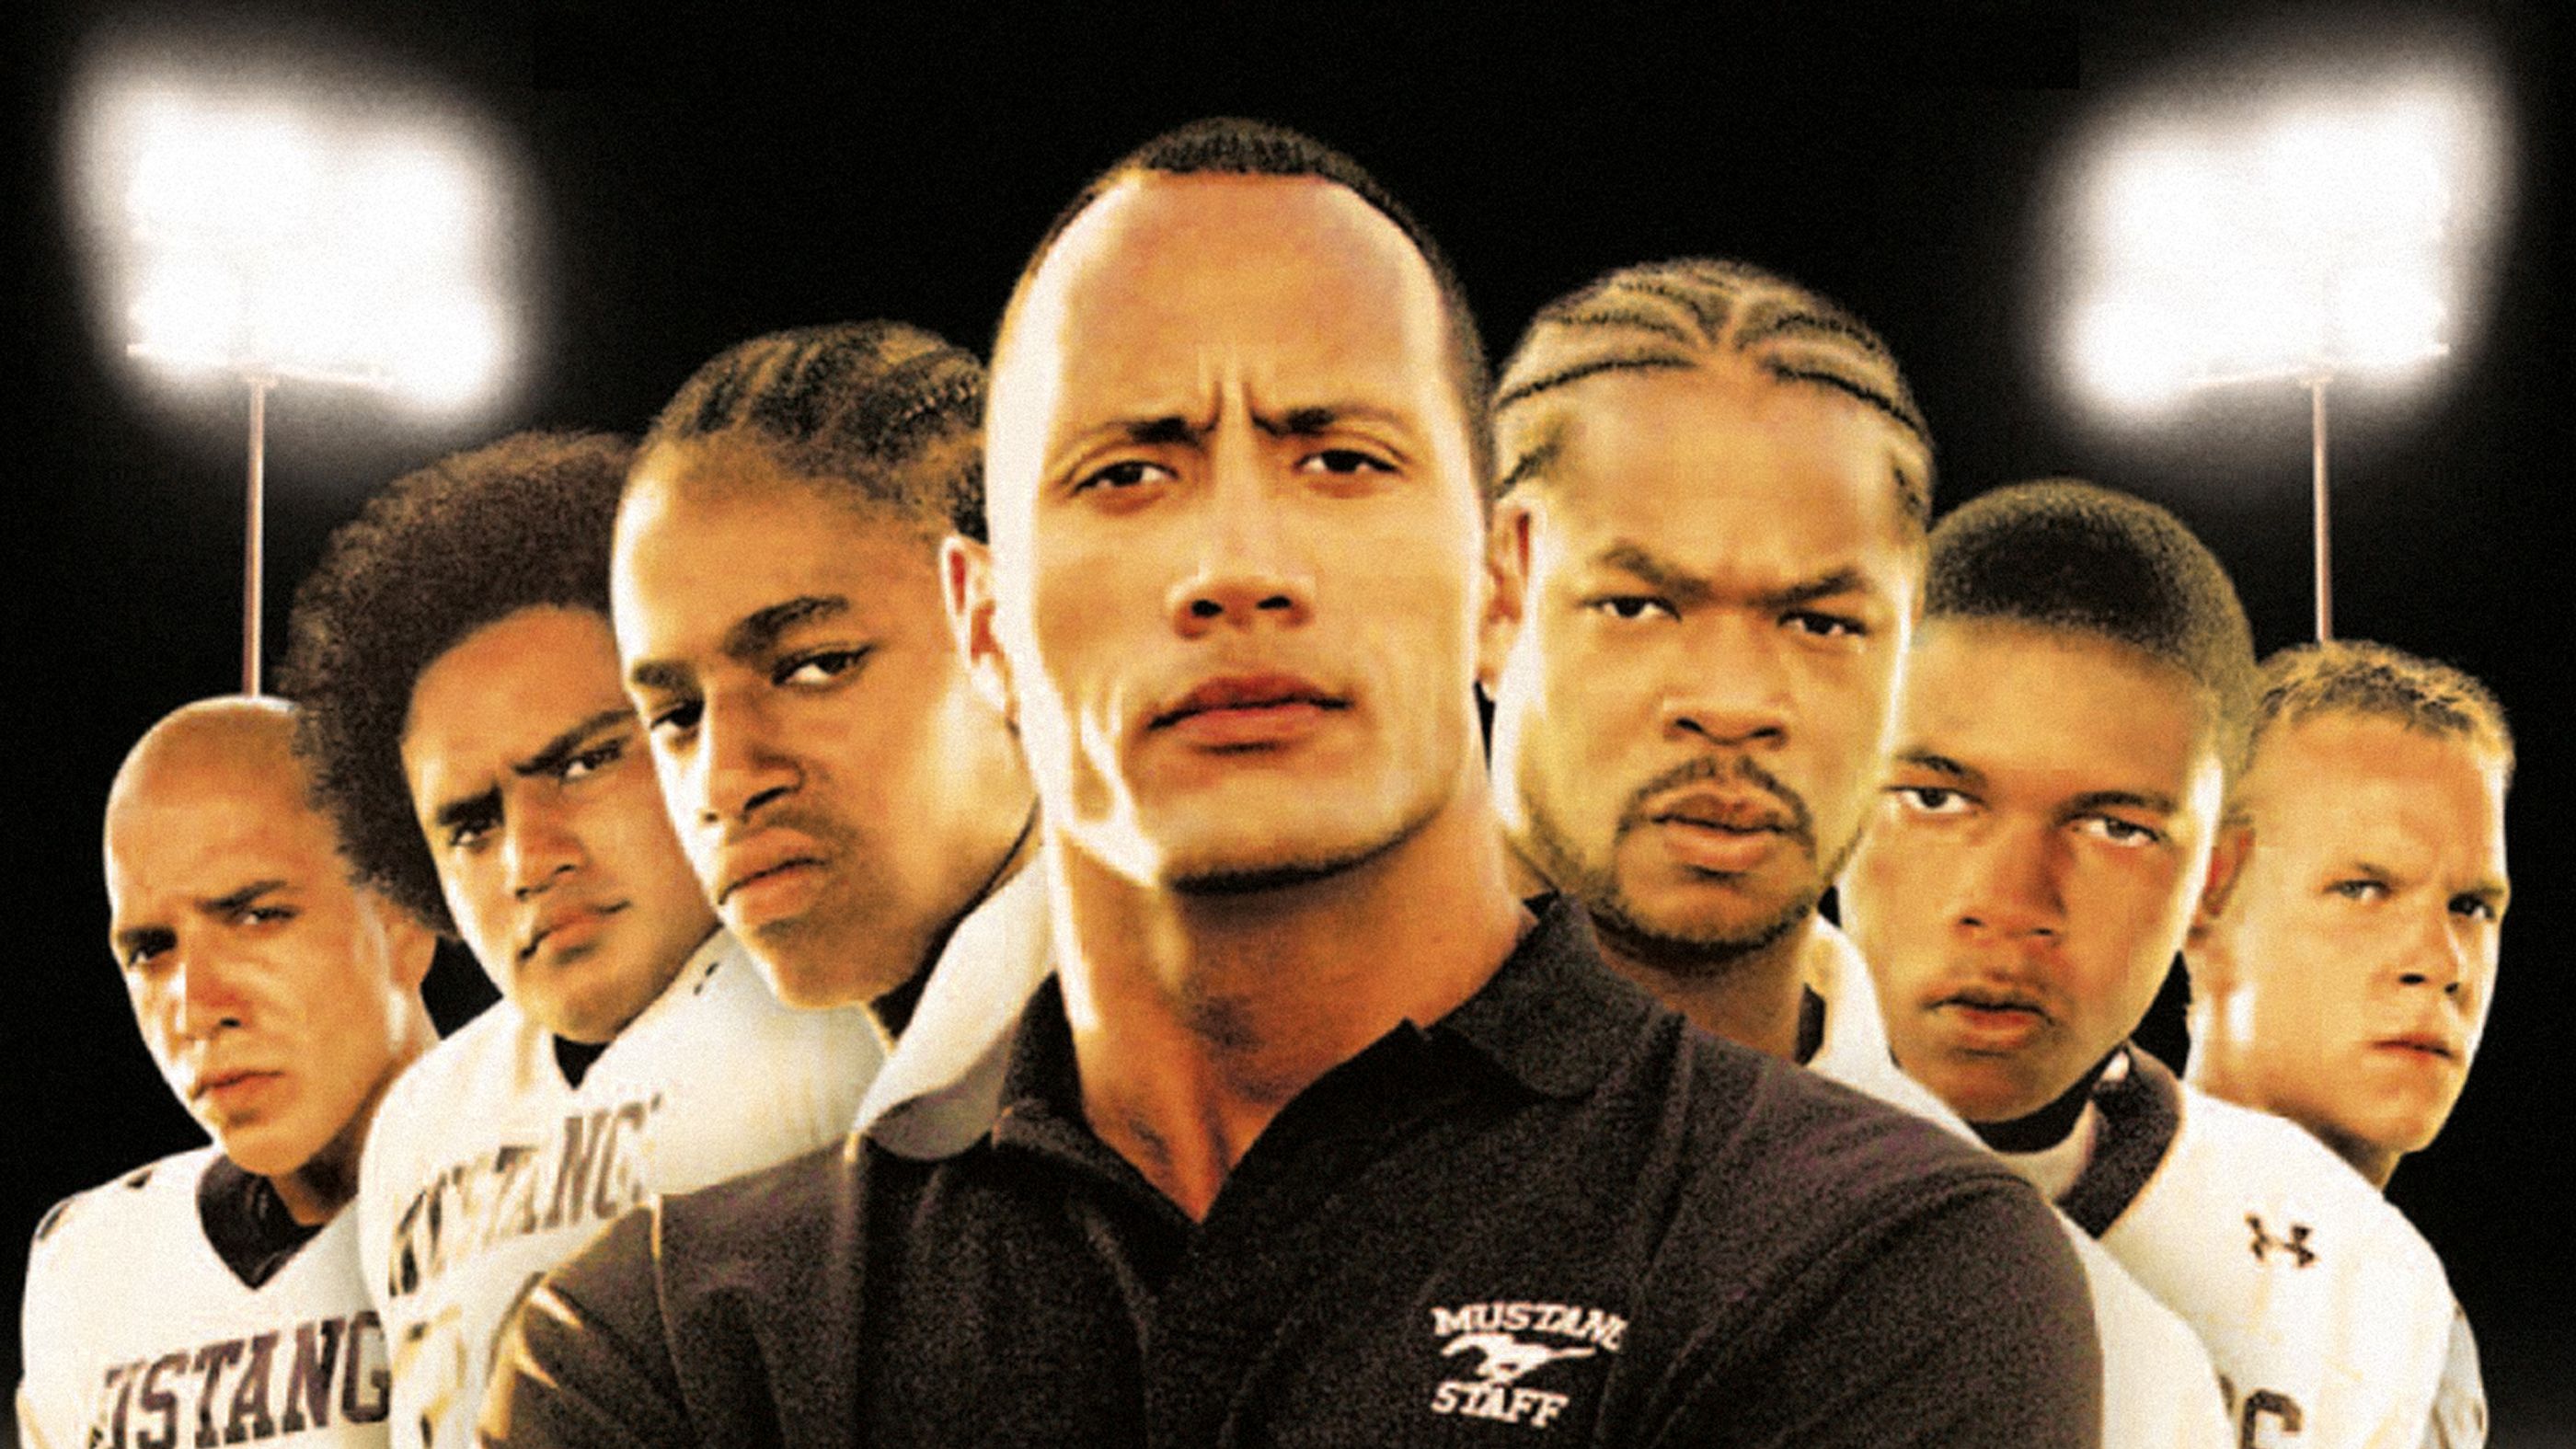 Is Gridiron Gang a True Story? Is the 2006 Movie Based on Real Life?